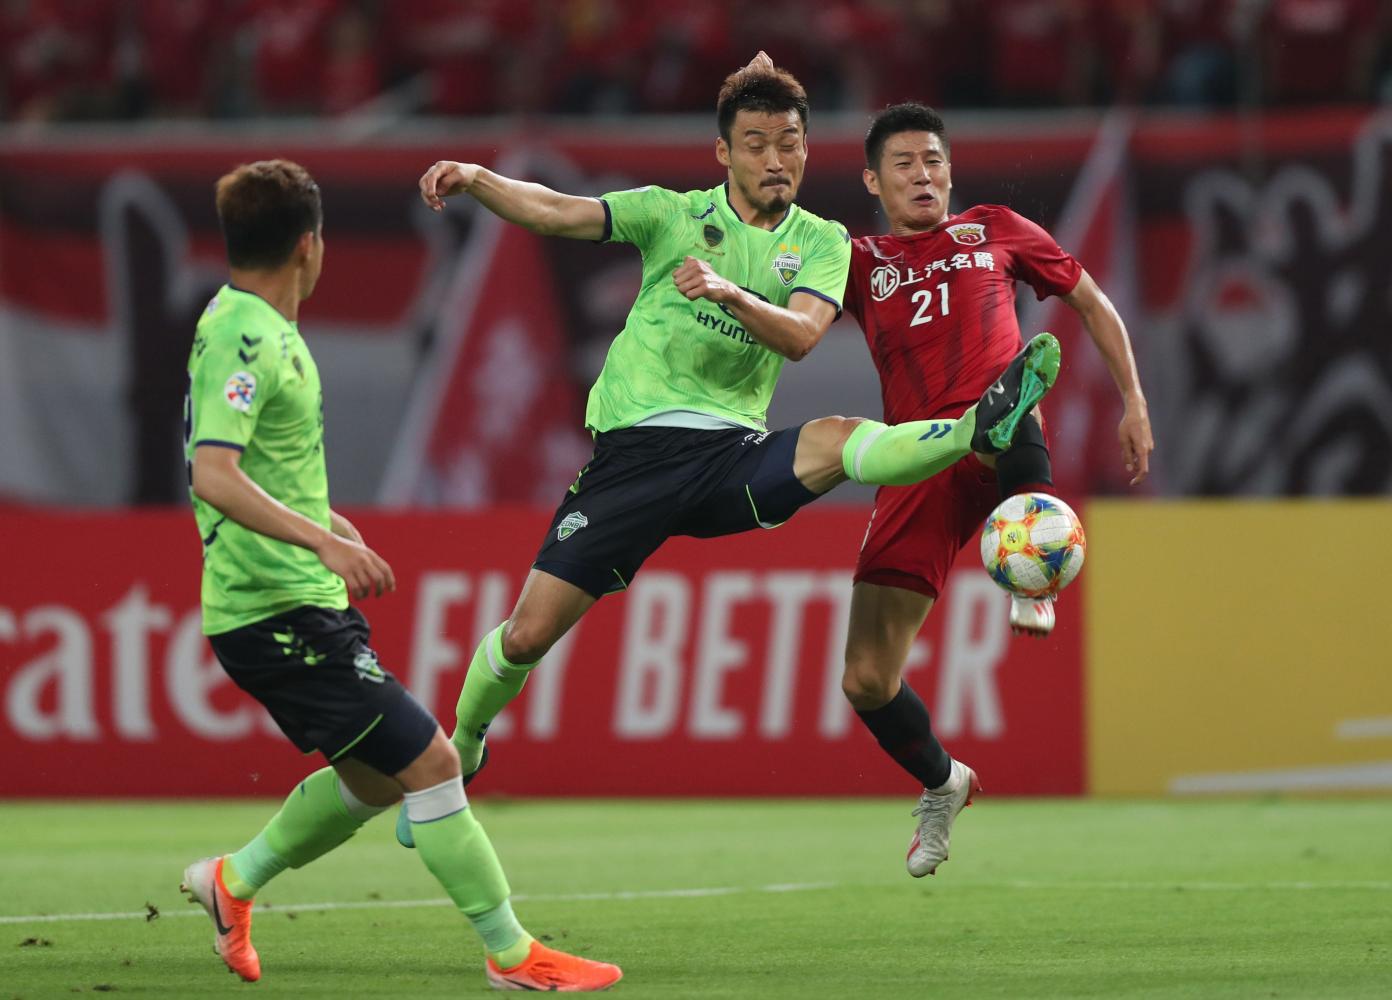 Players from Jeonbuk Hyundai and Shanghai SIPG take part in an AFC Champions League game.  